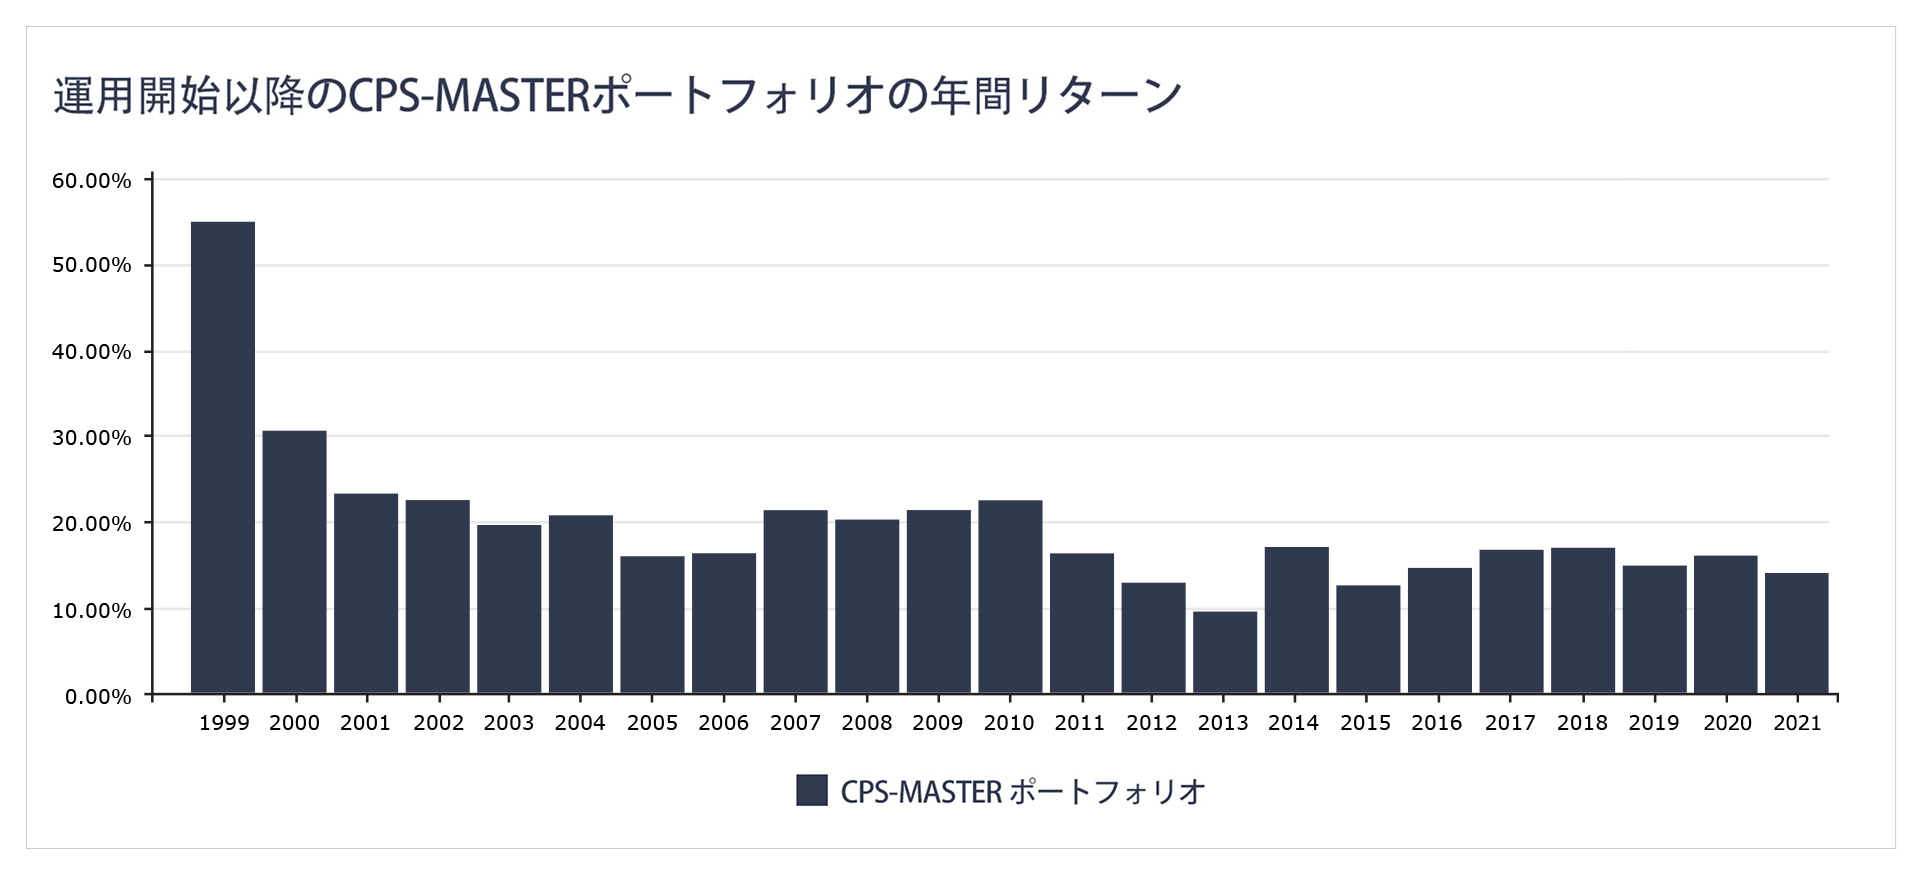 cps-master-no-losing-year-since-inception-japanese